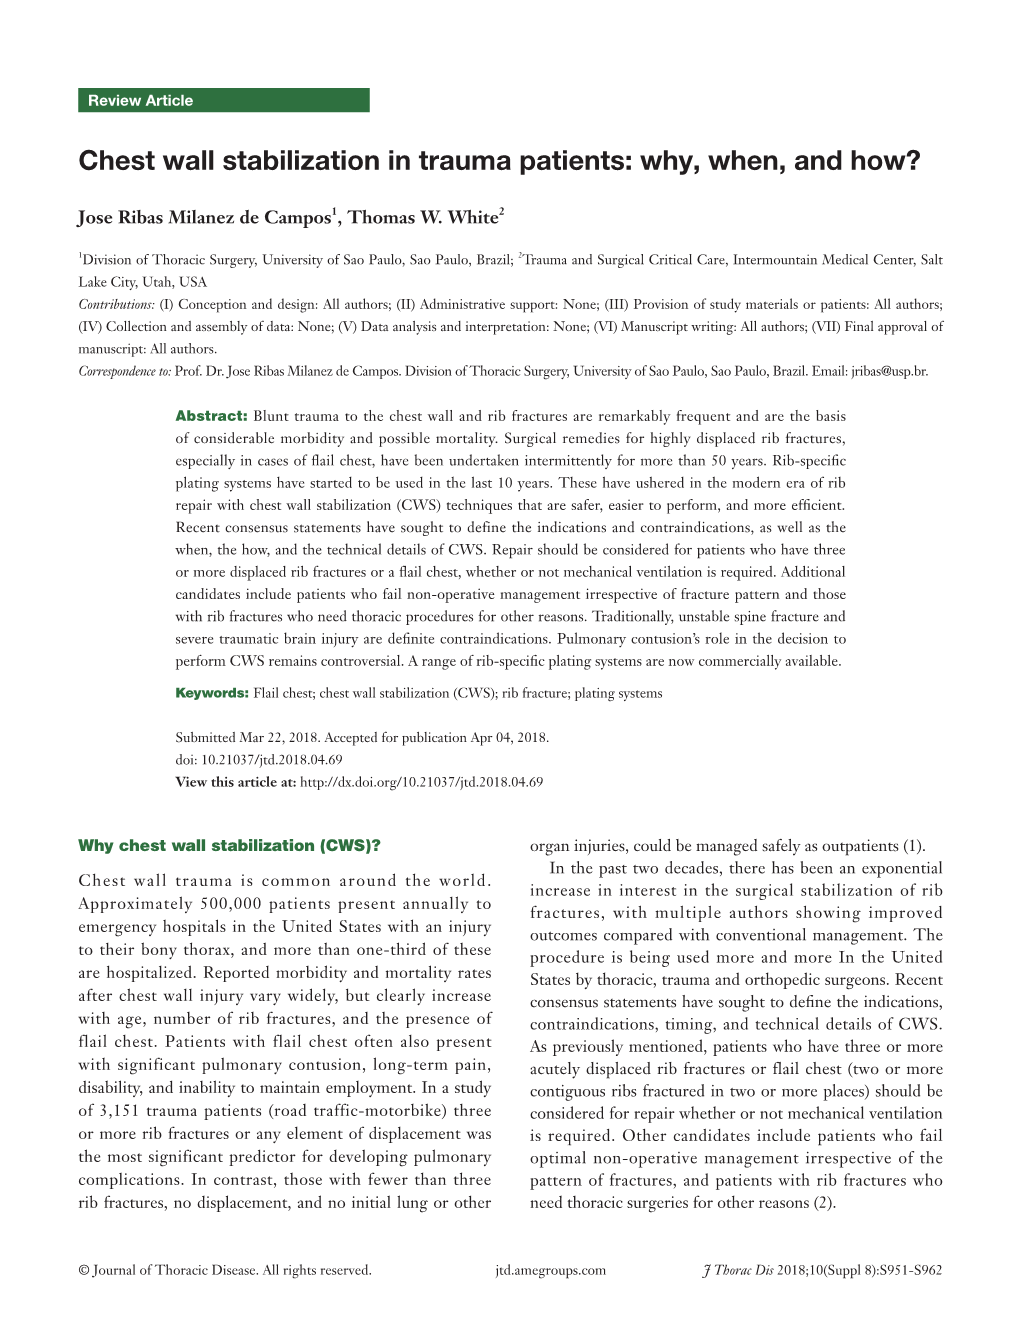 Chest Wall Stabilization in Trauma Patients: Why, When, and How?